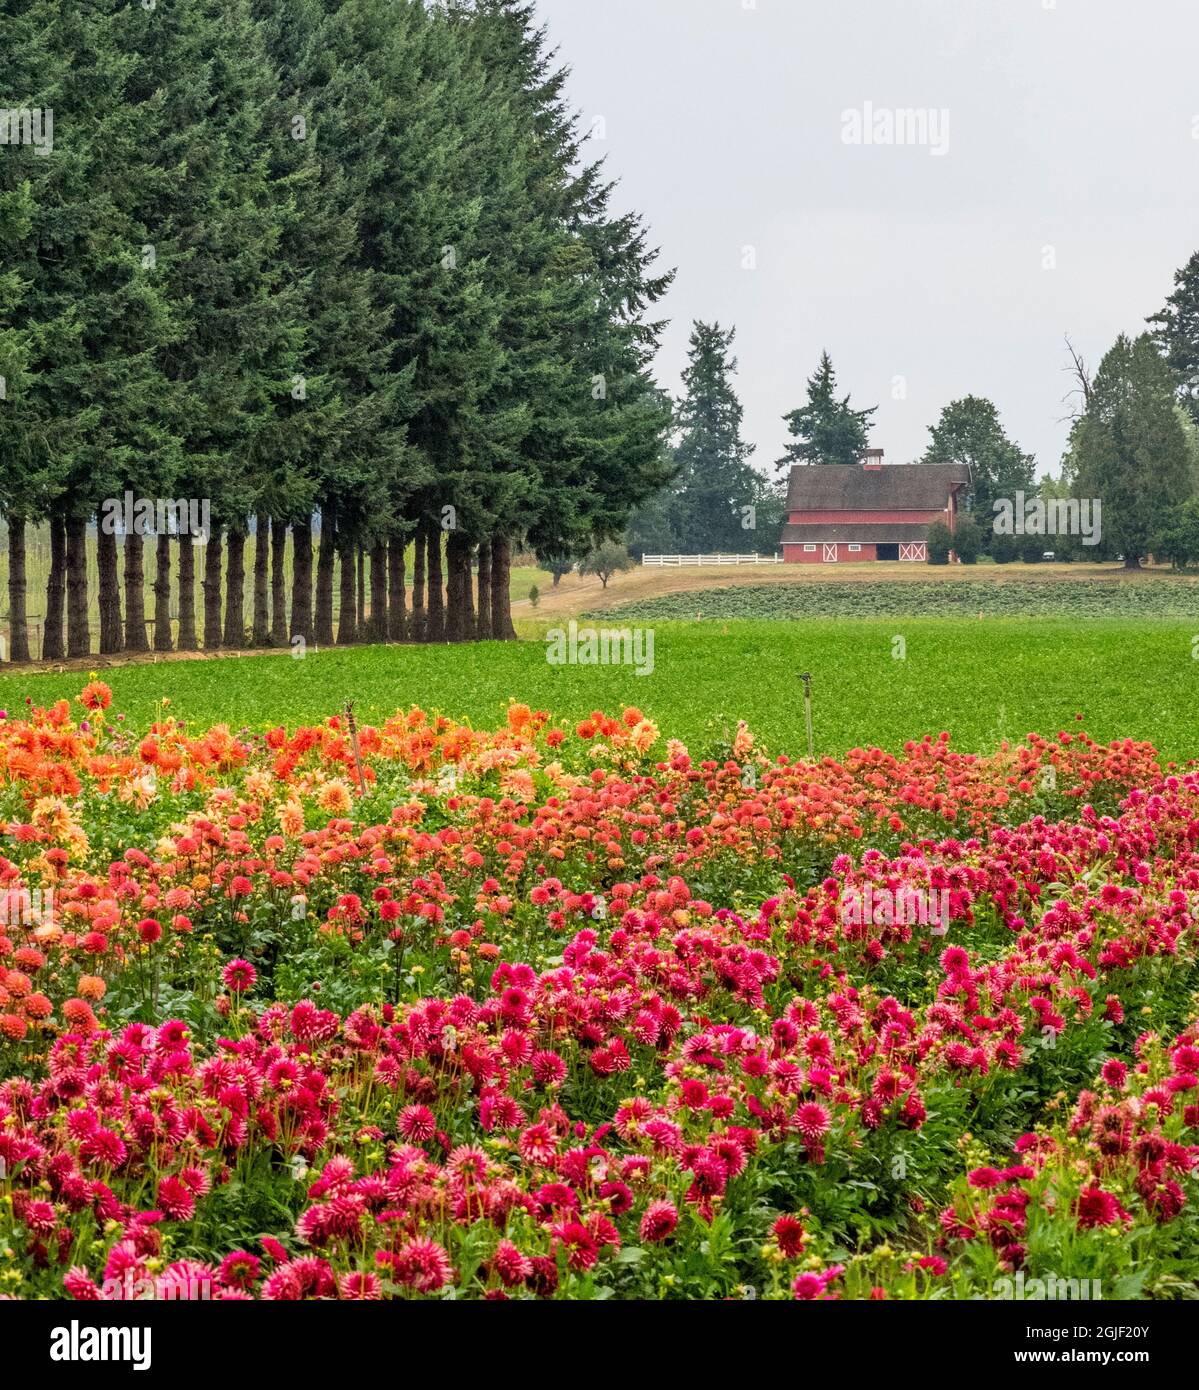 USA, Oregon, Canby, Pacific Northwest Swan Island Dahlia Garden with row after row of Dahlias Stock Photo